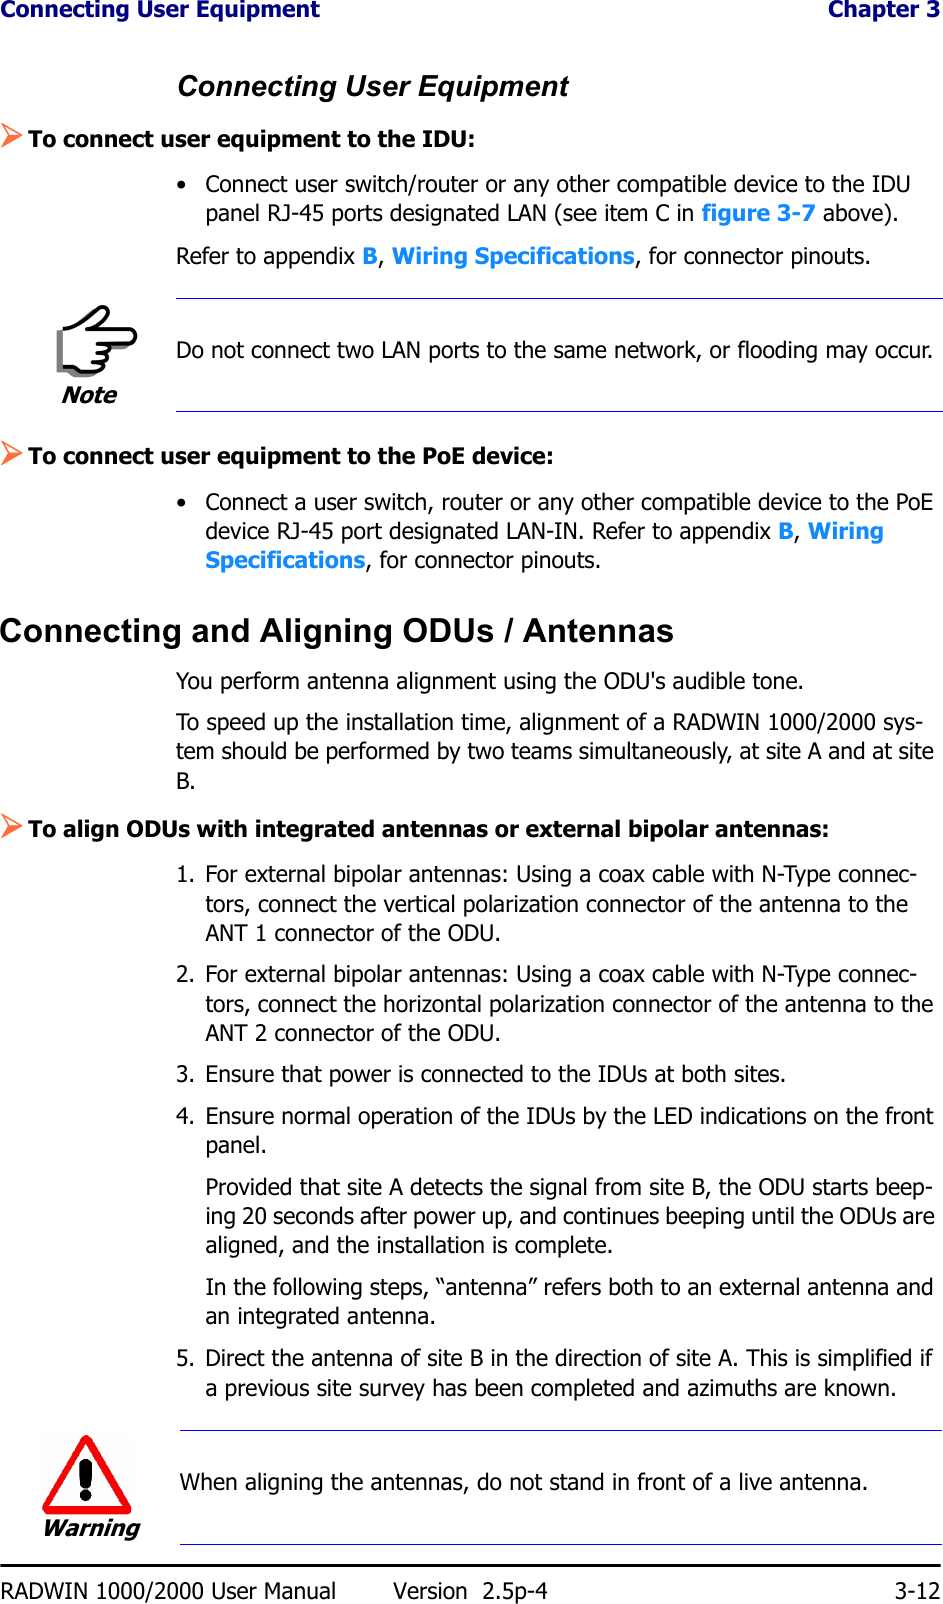 Connecting User Equipment  Chapter 3RADWIN 1000/2000 User Manual Version  2.5p-4 3-12Connecting User Equipment¾To connect user equipment to the IDU:• Connect user switch/router or any other compatible device to the IDU panel RJ-45 ports designated LAN (see item C in figure 3-7 above).Refer to appendix B, Wiring Specifications, for connector pinouts.¾To connect user equipment to the PoE device:• Connect a user switch, router or any other compatible device to the PoE device RJ-45 port designated LAN-IN. Refer to appendix B, Wiring Specifications, for connector pinouts.Connecting and Aligning ODUs / AntennasYou perform antenna alignment using the ODU&apos;s audible tone.To speed up the installation time, alignment of a RADWIN 1000/2000 sys-tem should be performed by two teams simultaneously, at site A and at site B.¾To align ODUs with integrated antennas or external bipolar antennas:1. For external bipolar antennas: Using a coax cable with N-Type connec-tors, connect the vertical polarization connector of the antenna to the ANT 1 connector of the ODU.2. For external bipolar antennas: Using a coax cable with N-Type connec-tors, connect the horizontal polarization connector of the antenna to the ANT 2 connector of the ODU.3. Ensure that power is connected to the IDUs at both sites.4. Ensure normal operation of the IDUs by the LED indications on the front panel.Provided that site A detects the signal from site B, the ODU starts beep-ing 20 seconds after power up, and continues beeping until the ODUs are aligned, and the installation is complete.In the following steps, “antenna” refers both to an external antenna and an integrated antenna.5. Direct the antenna of site B in the direction of site A. This is simplified if a previous site survey has been completed and azimuths are known.NoteDo not connect two LAN ports to the same network, or flooding may occur.WarningWhen aligning the antennas, do not stand in front of a live antenna.